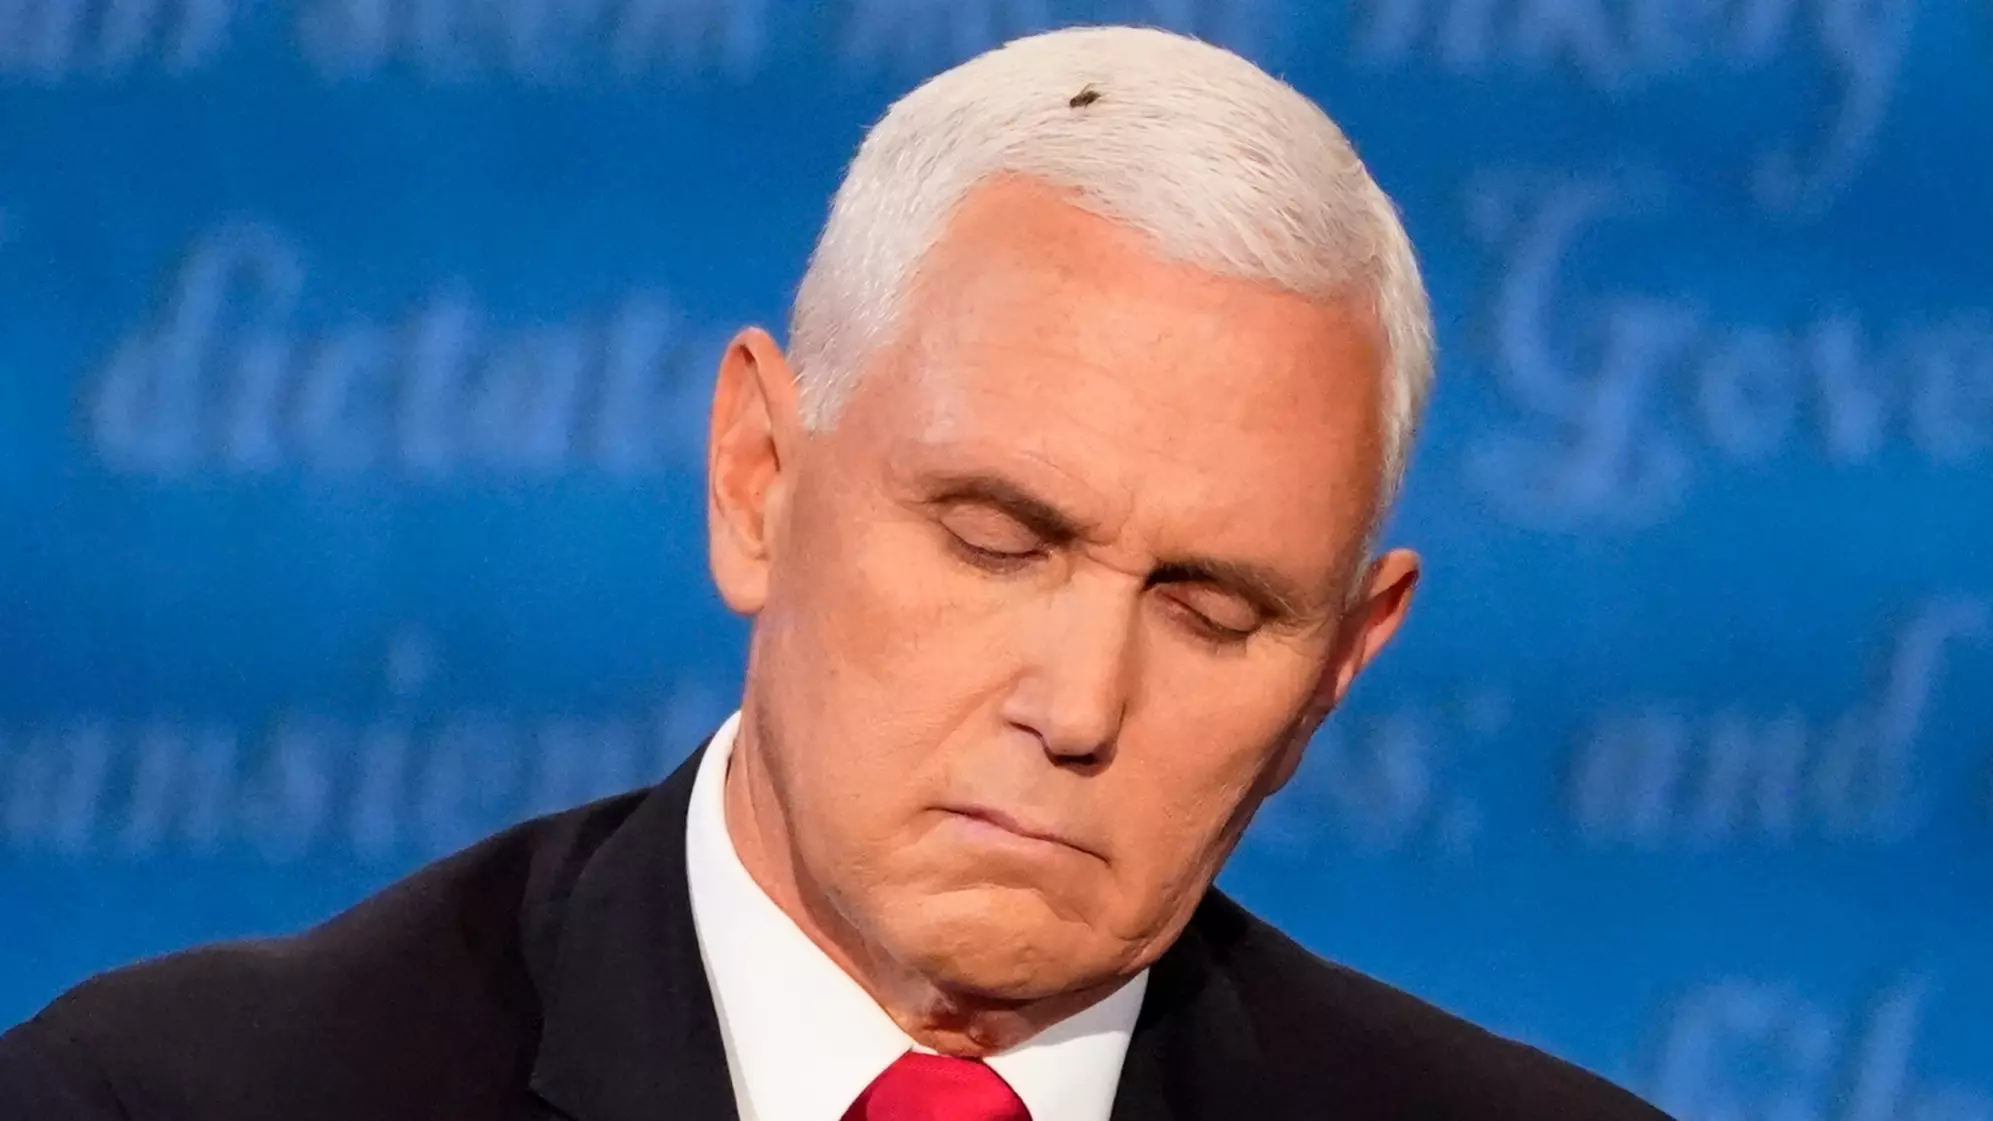 Mike Pence's Fly Has Already Been Turned Into Halloween Costume